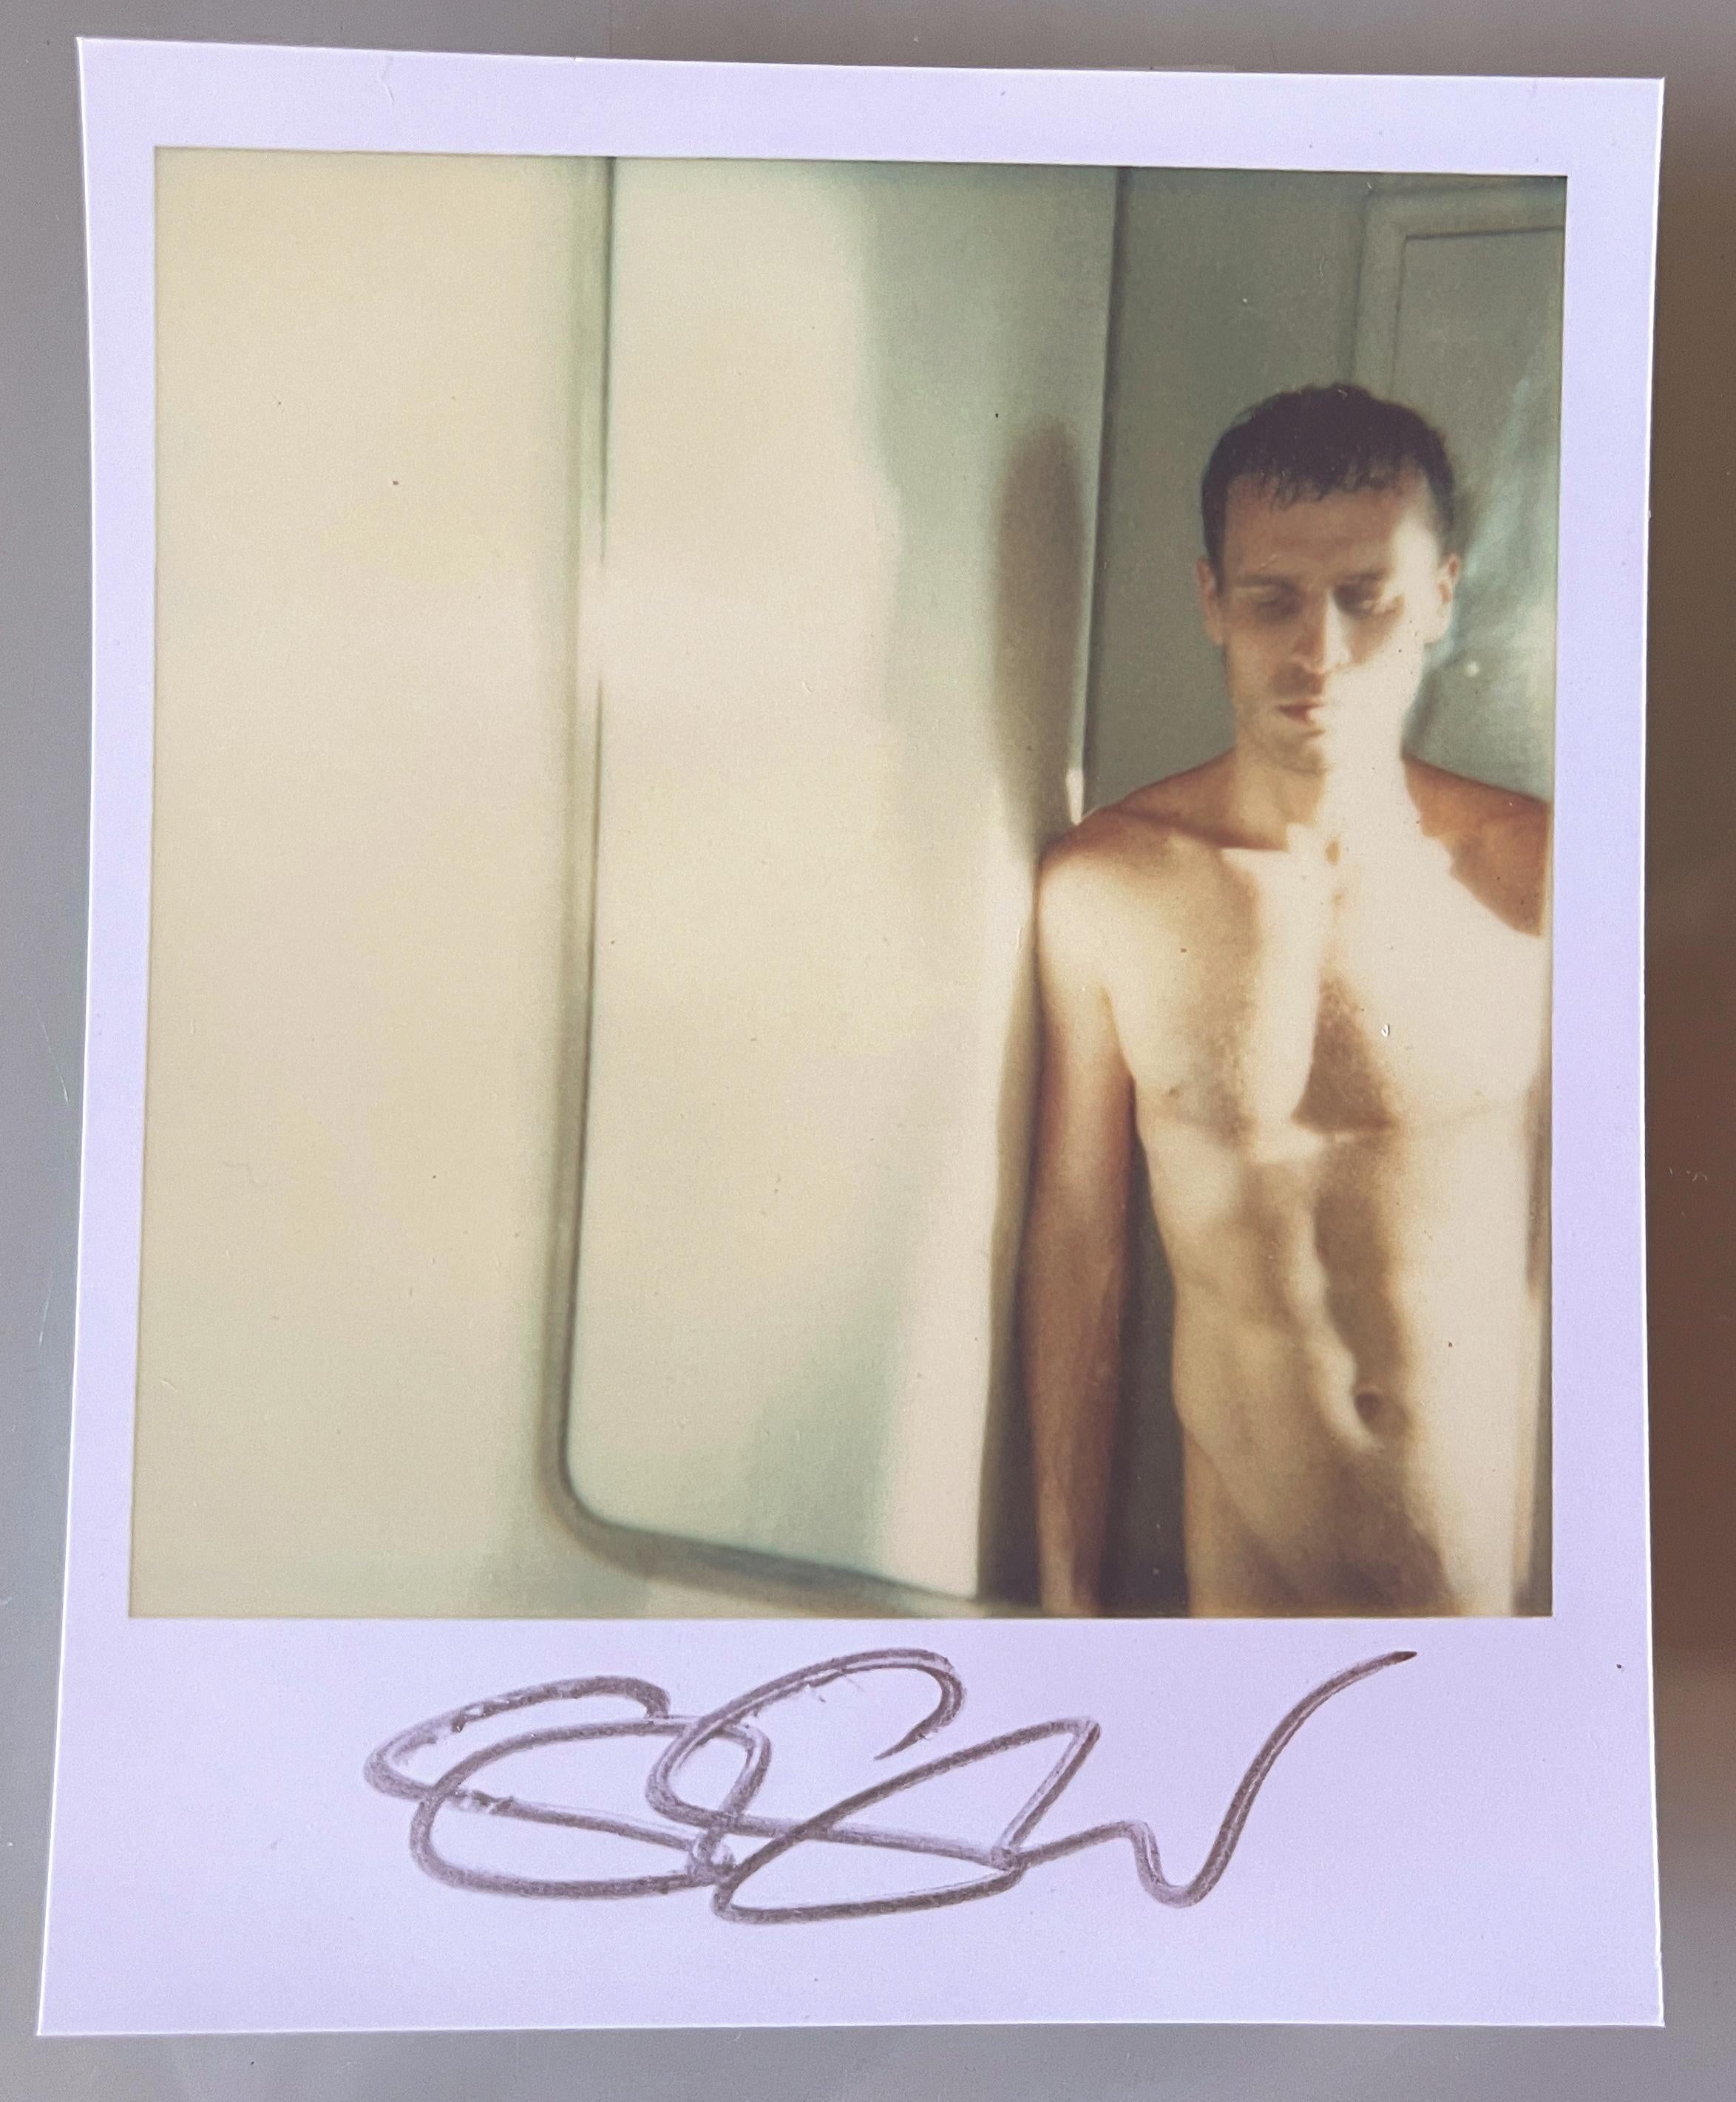 1 Stefanie Schneider Mini 'Male Nude' - 1999 - 

signed in front, not mounted. 
1 Digital Color Photographs based on a Polaroid. 

Polaroid sized open Editions 1999-2016
10.7 x 8.8cm (Image 7.9x7.7cm) each.

Stefanie Schneider interviewed for the